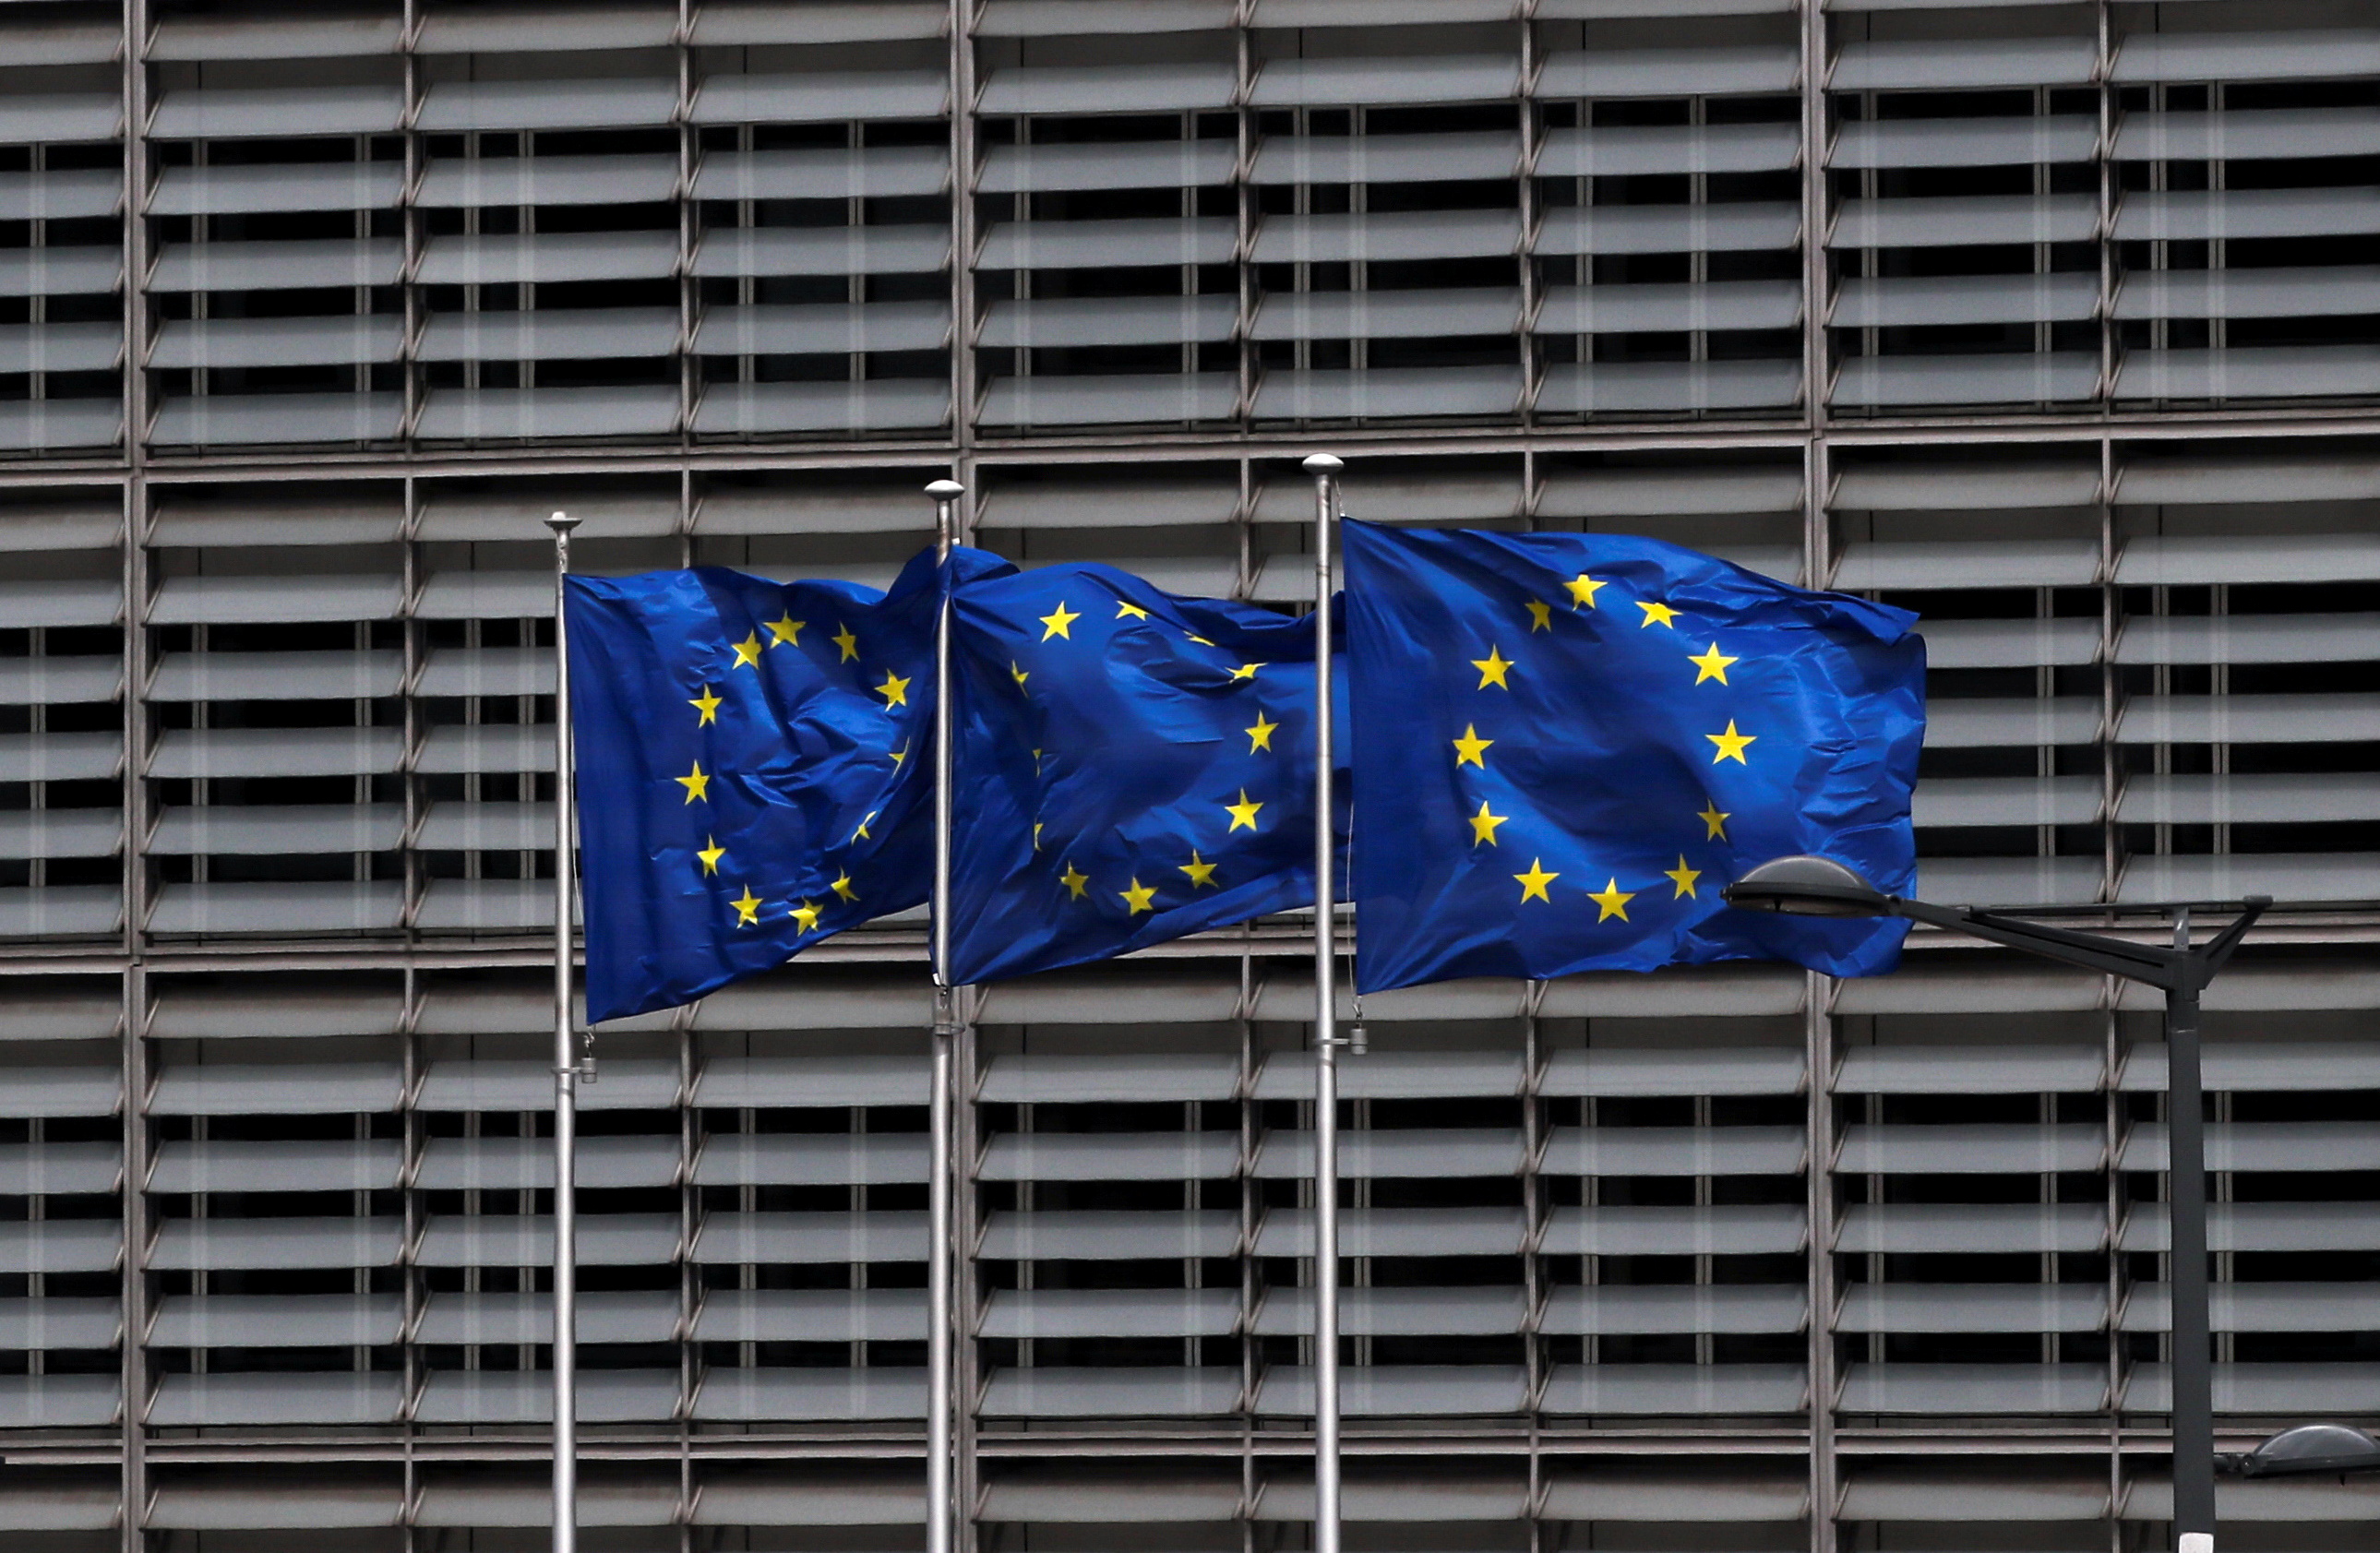 European Union flags flutter outside the EU Commission headquarters in Brussels, Belgium May 5, 2021. REUTERS/Yves Herman